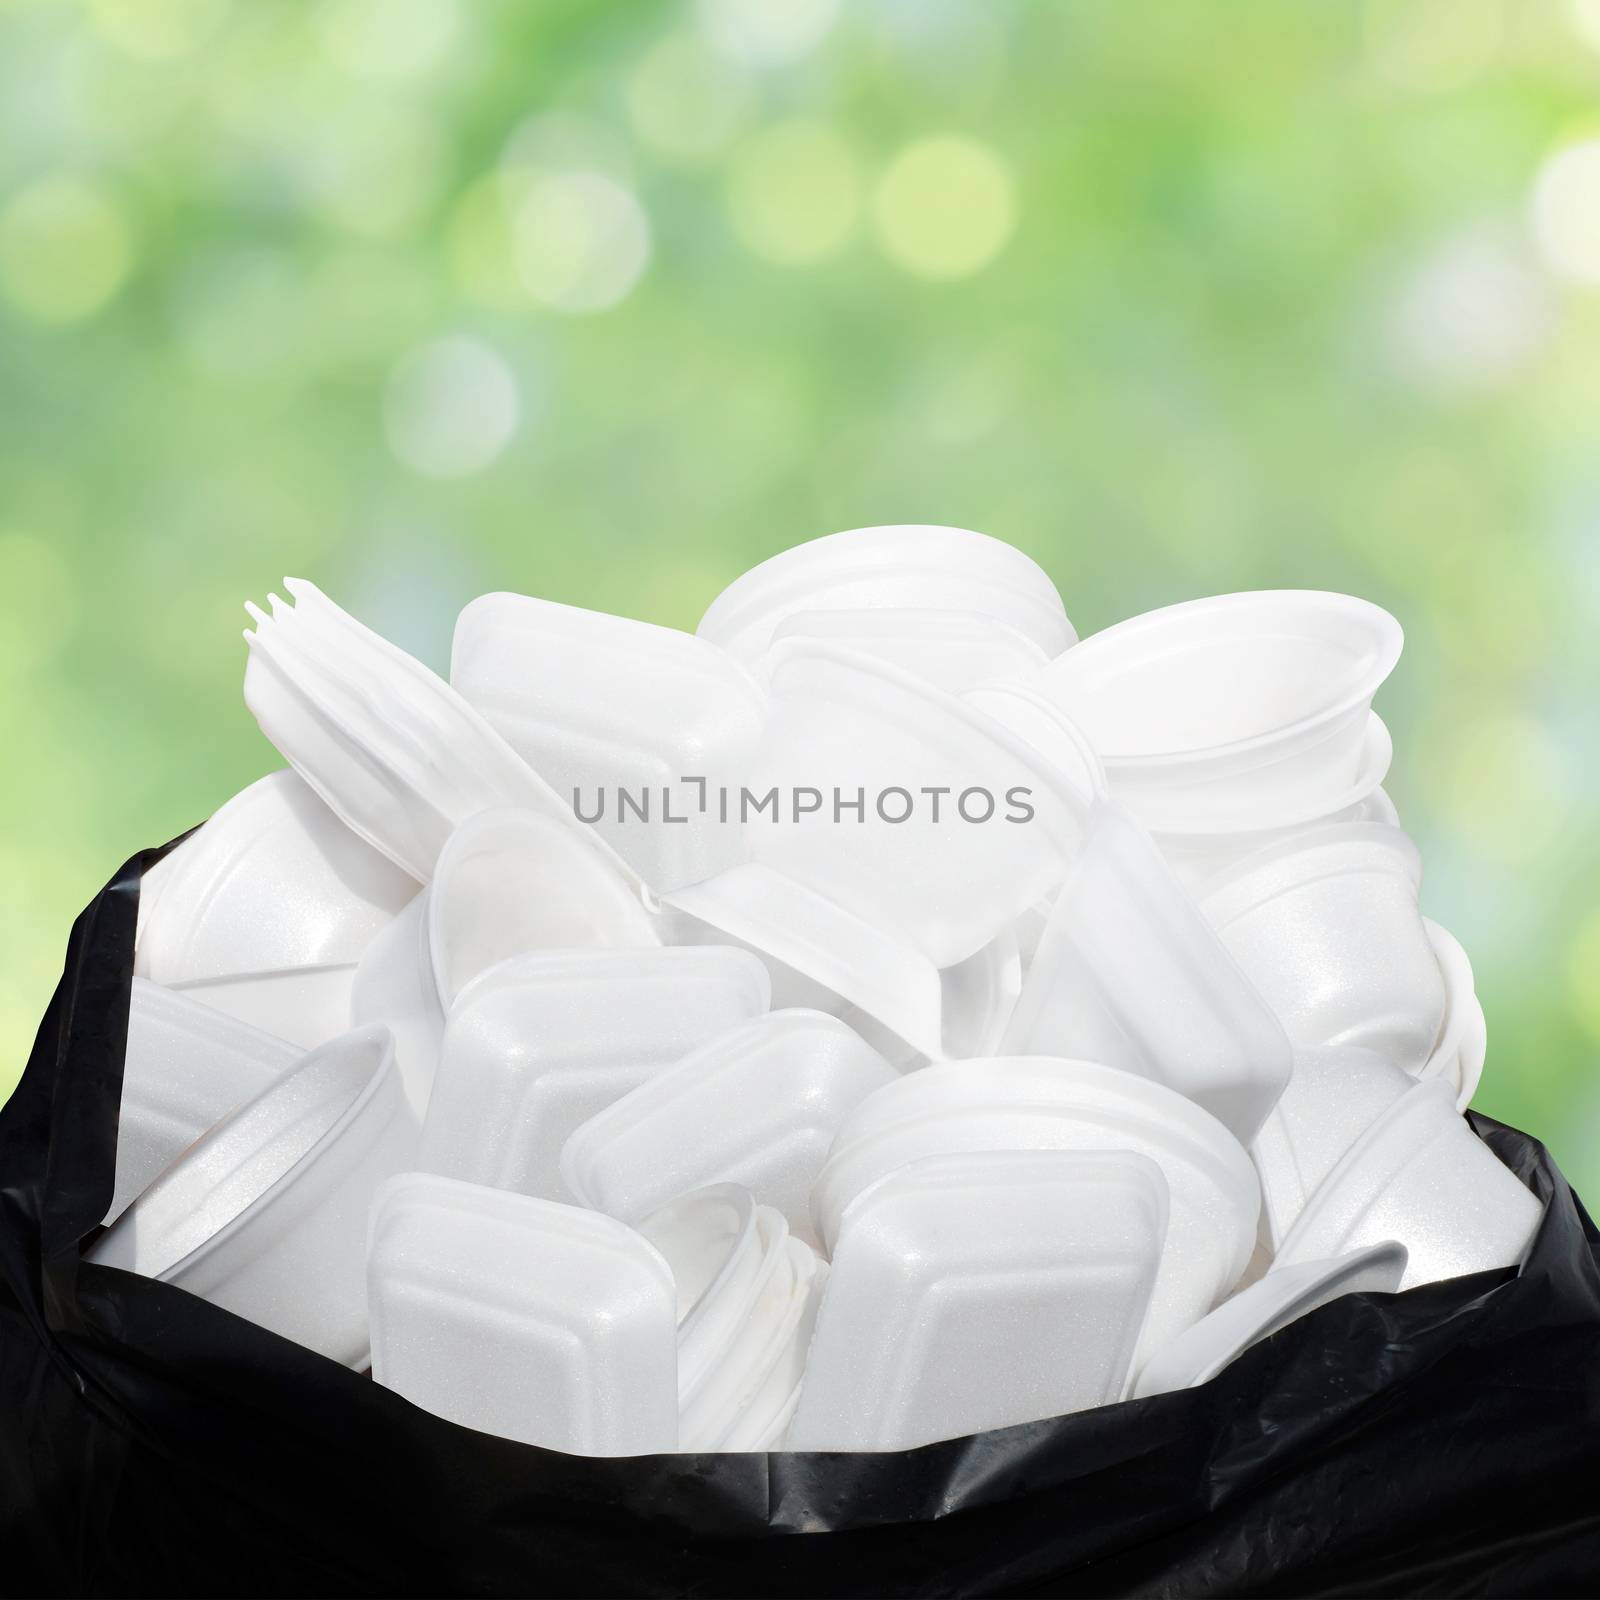 Waste Garbage foam food tray white many pile on the plastic black bag dirty on green nature bokeh background